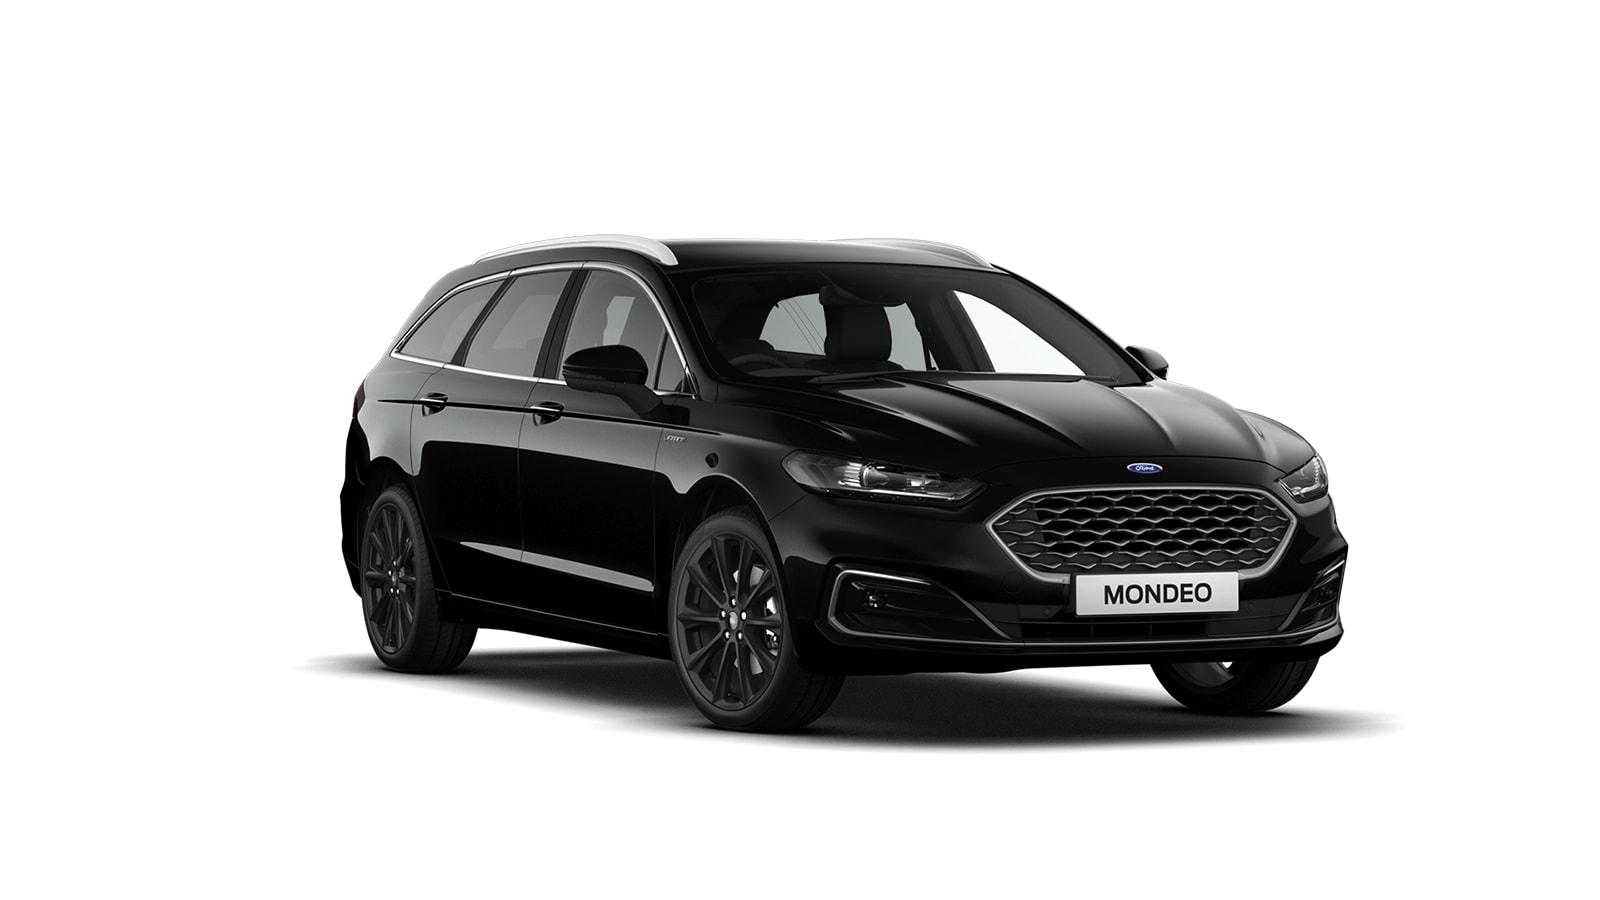 Ford Mondeo Vignale 2.0L EcoBlue 190PS at RGR Garages